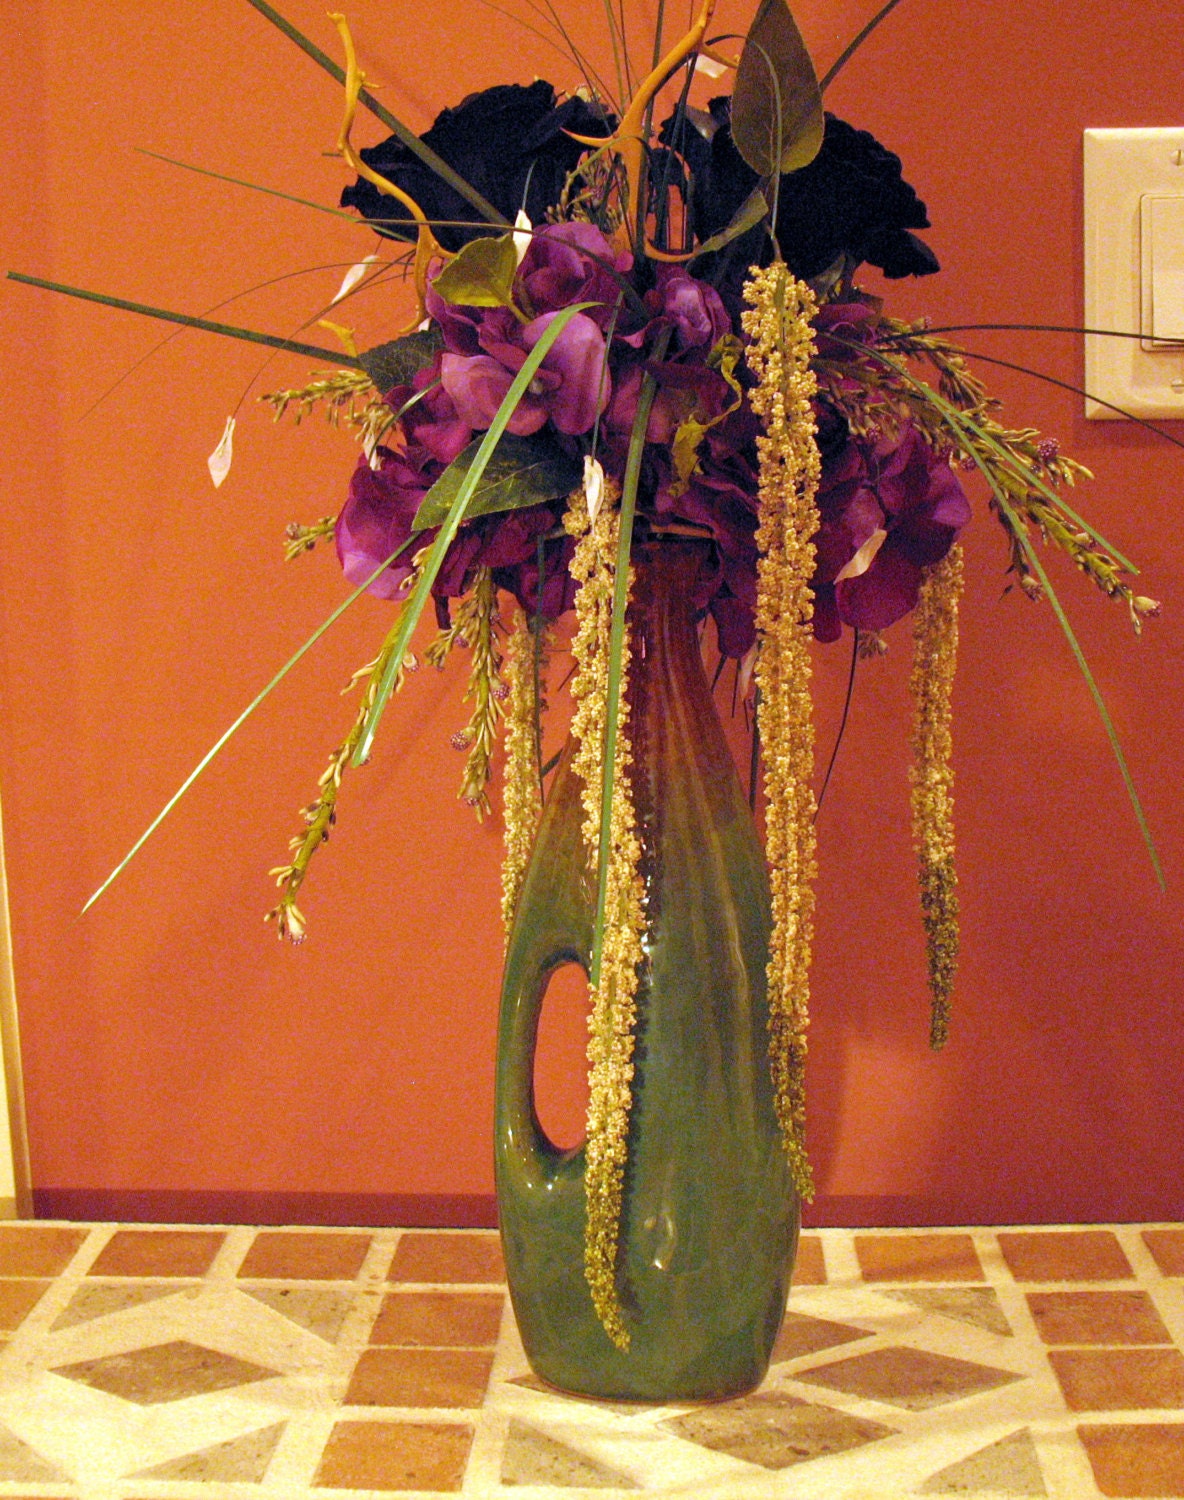 Gothic Flower Arrangement by OkoCreations on Etsy